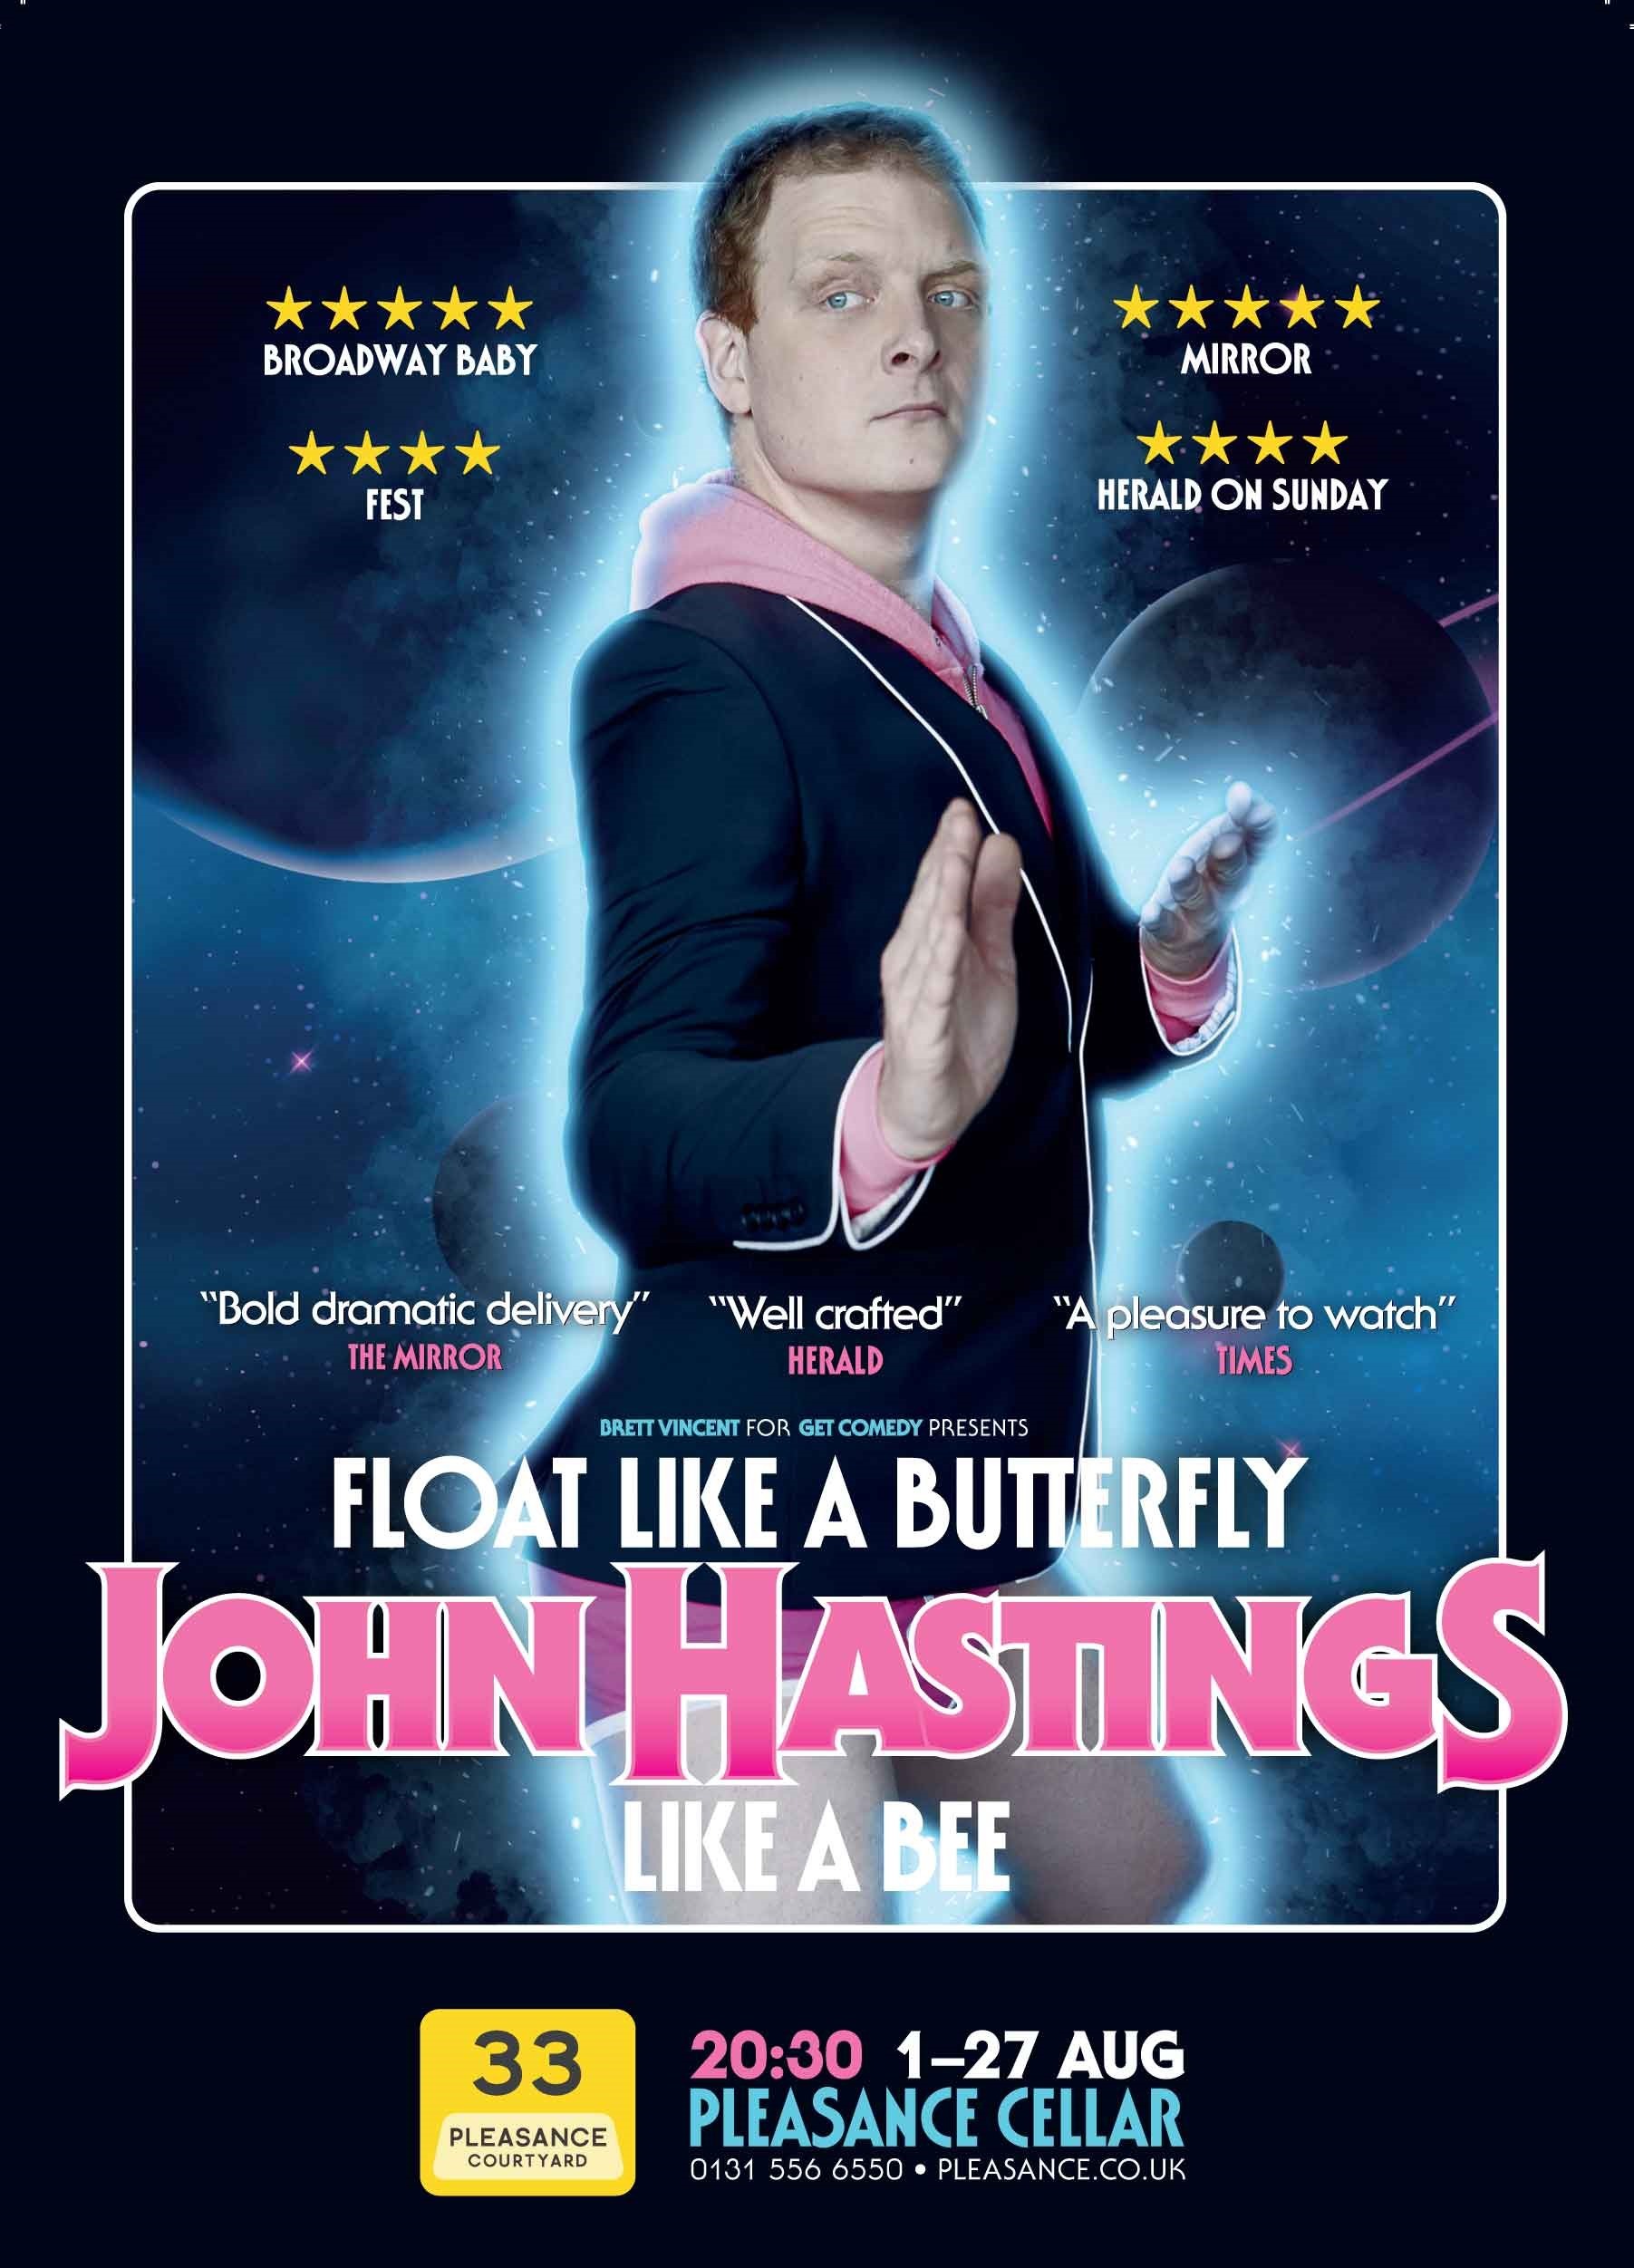 The poster for John Hastings: Float Like a Butterfly, John Hastings Like a Bee